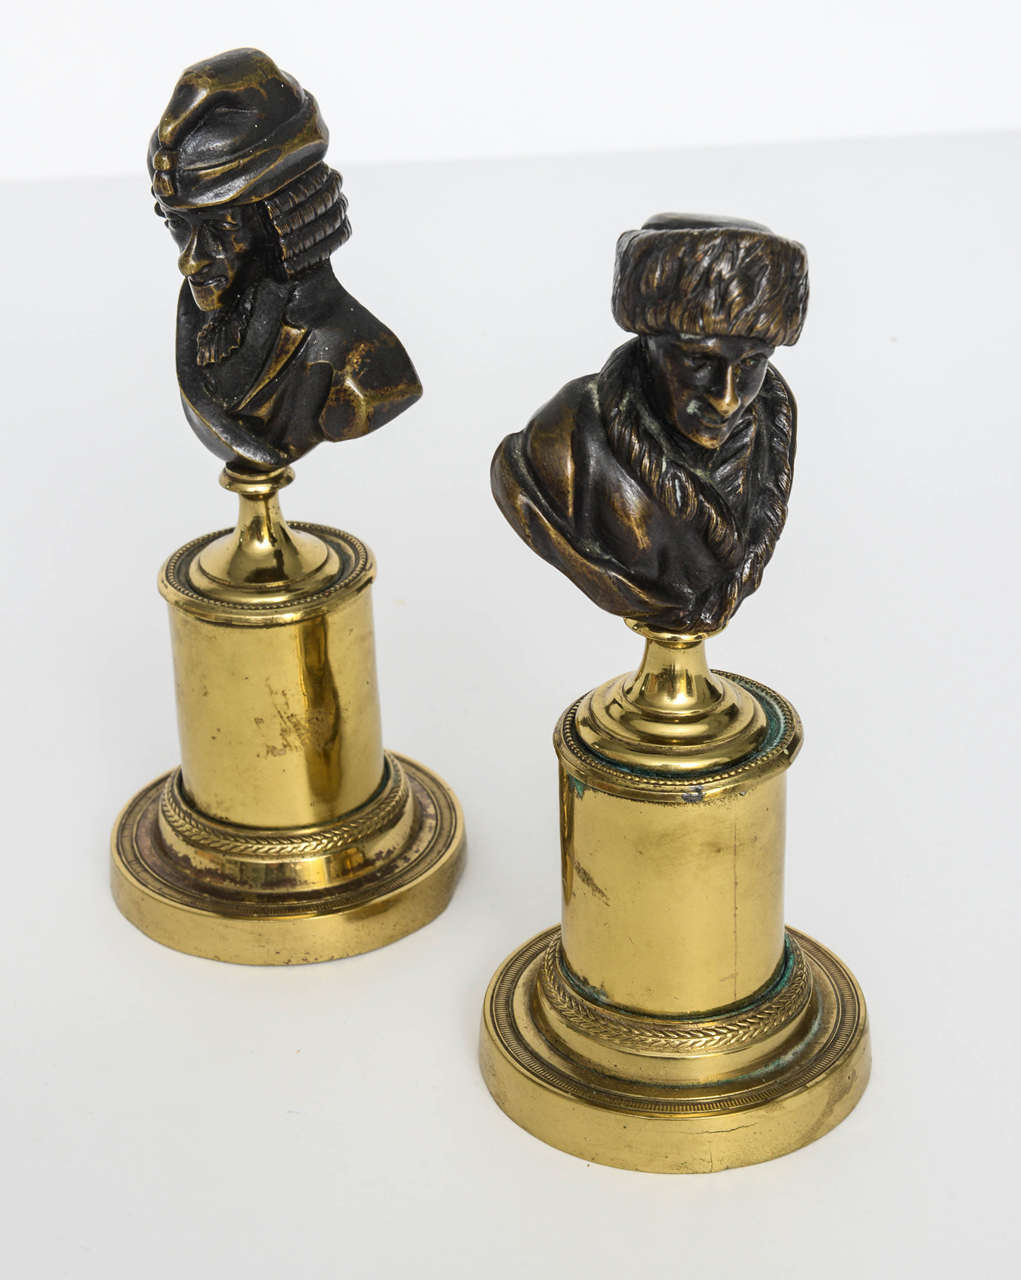 19th Century Pair of French Bronze Busts of Voltaire and Rousseau, early 19th c.